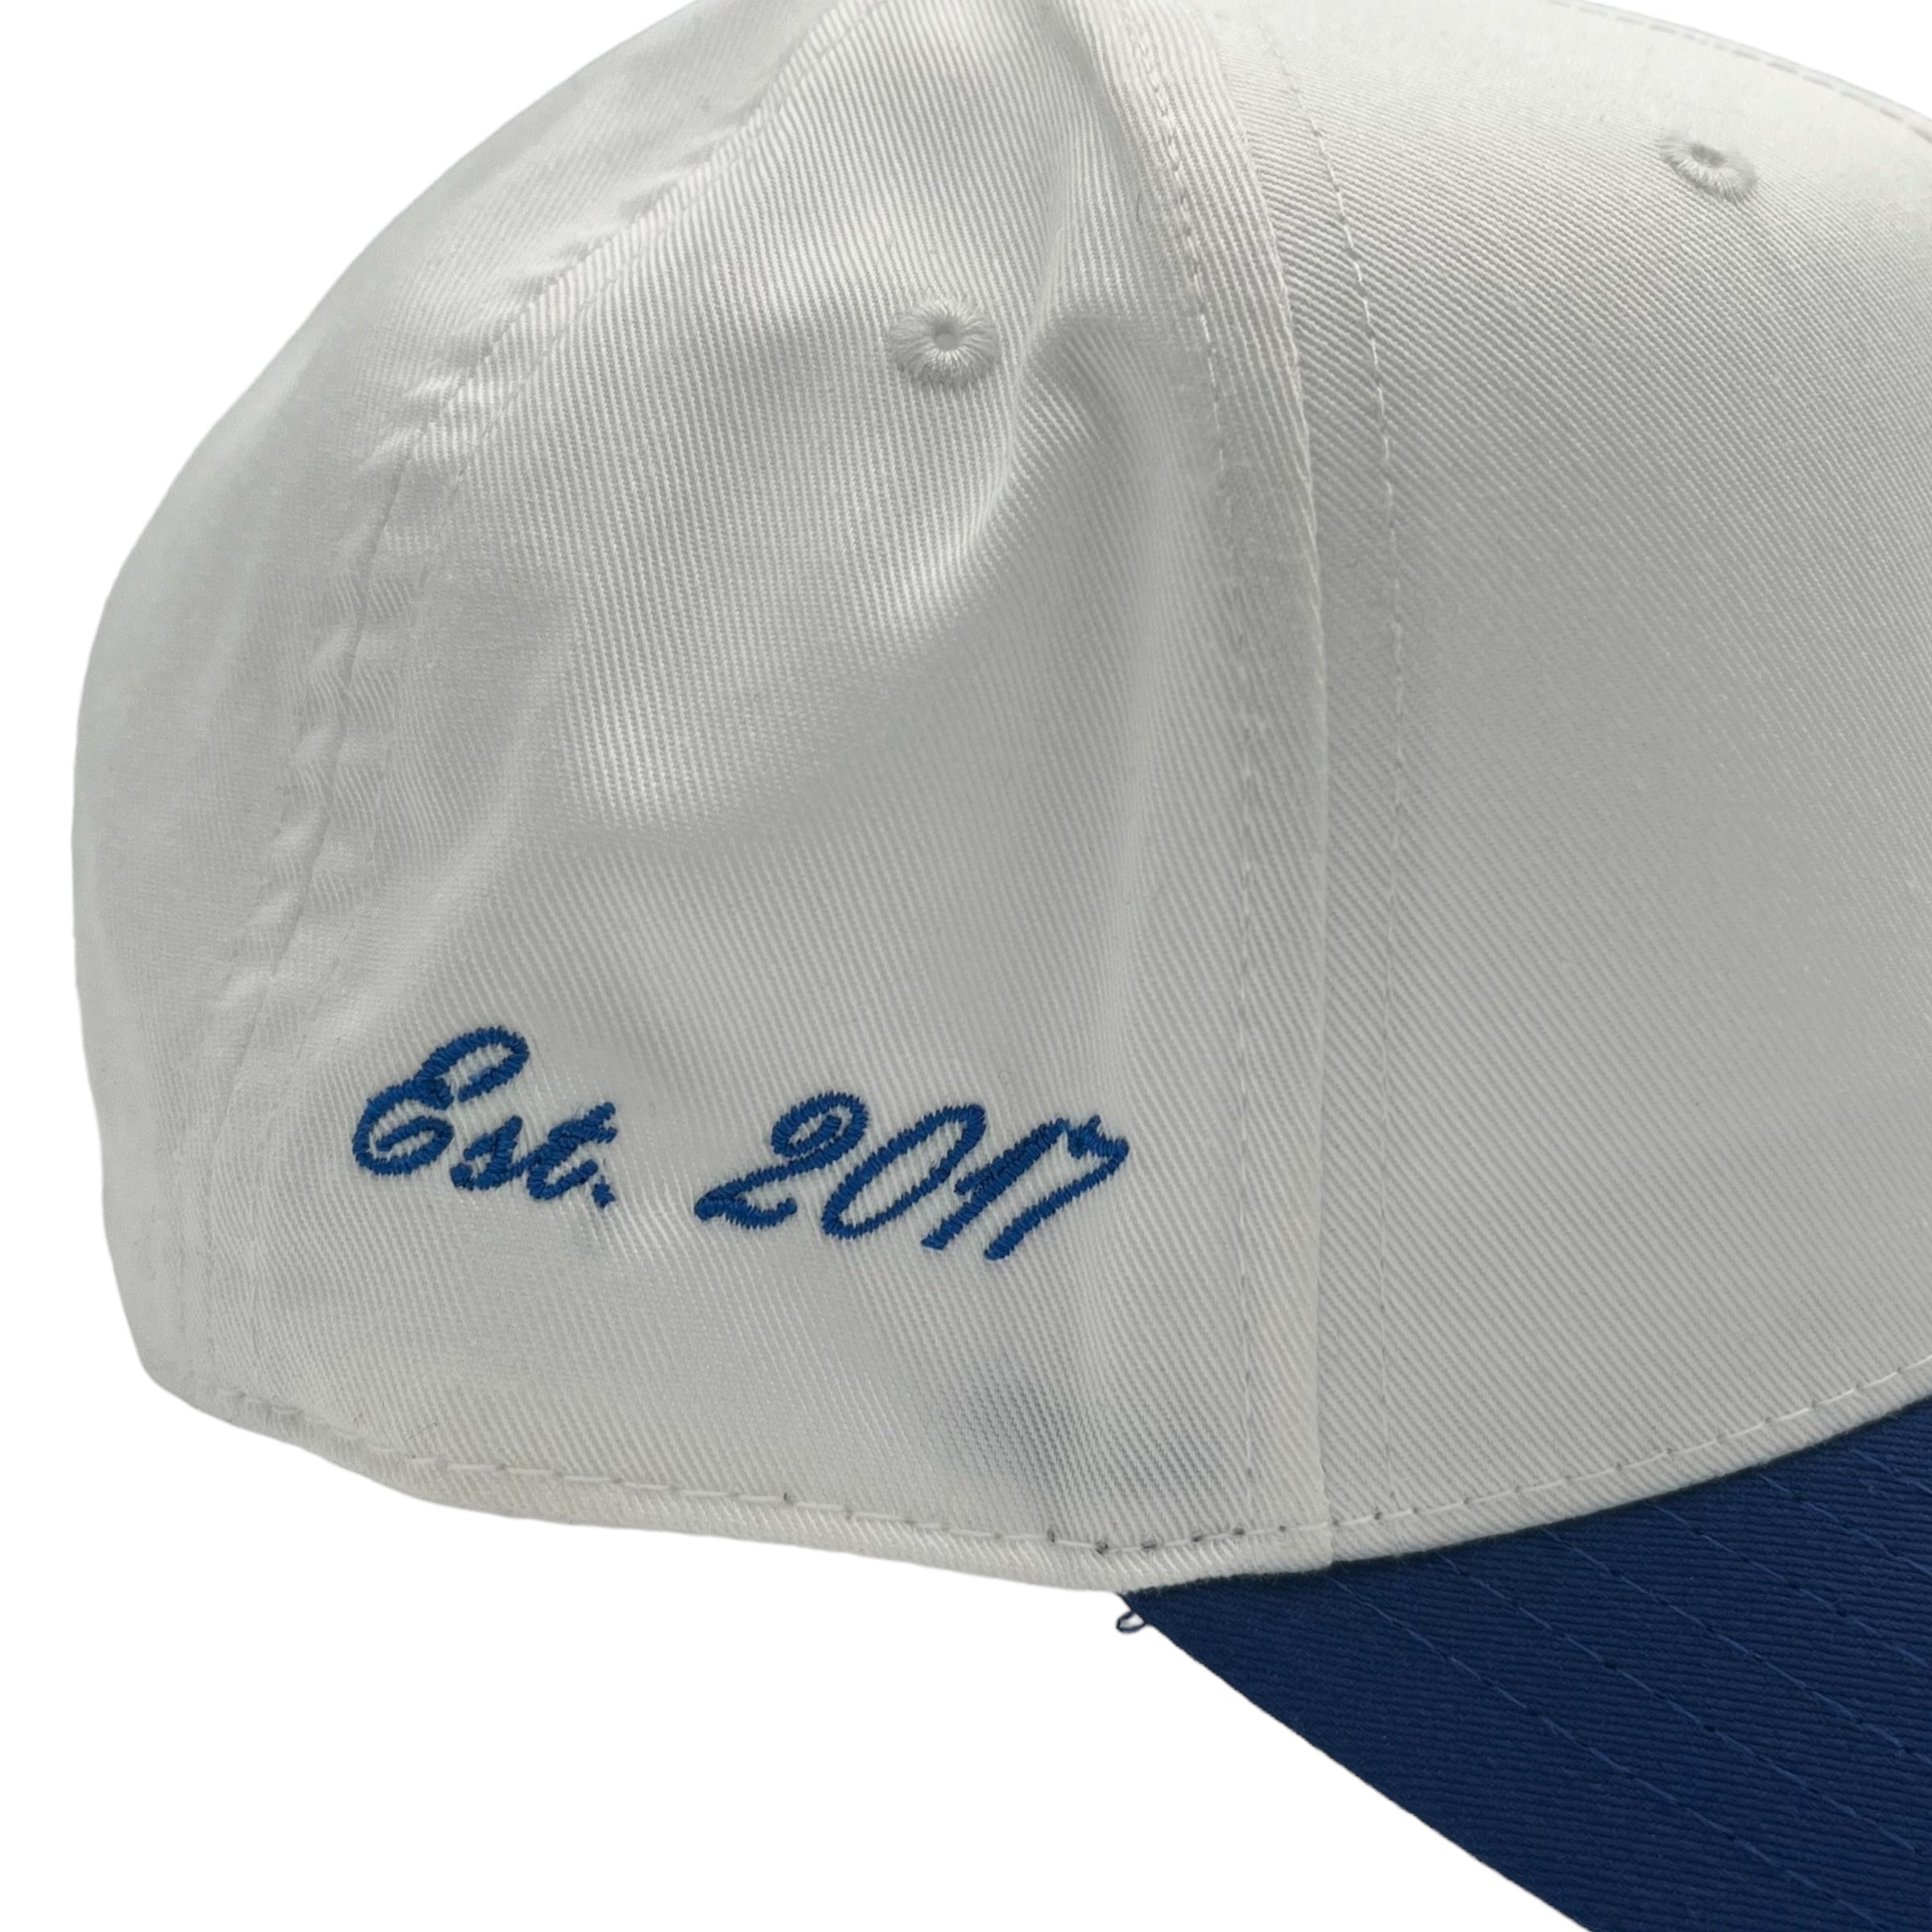 From Another Slugger Hat White/Blue